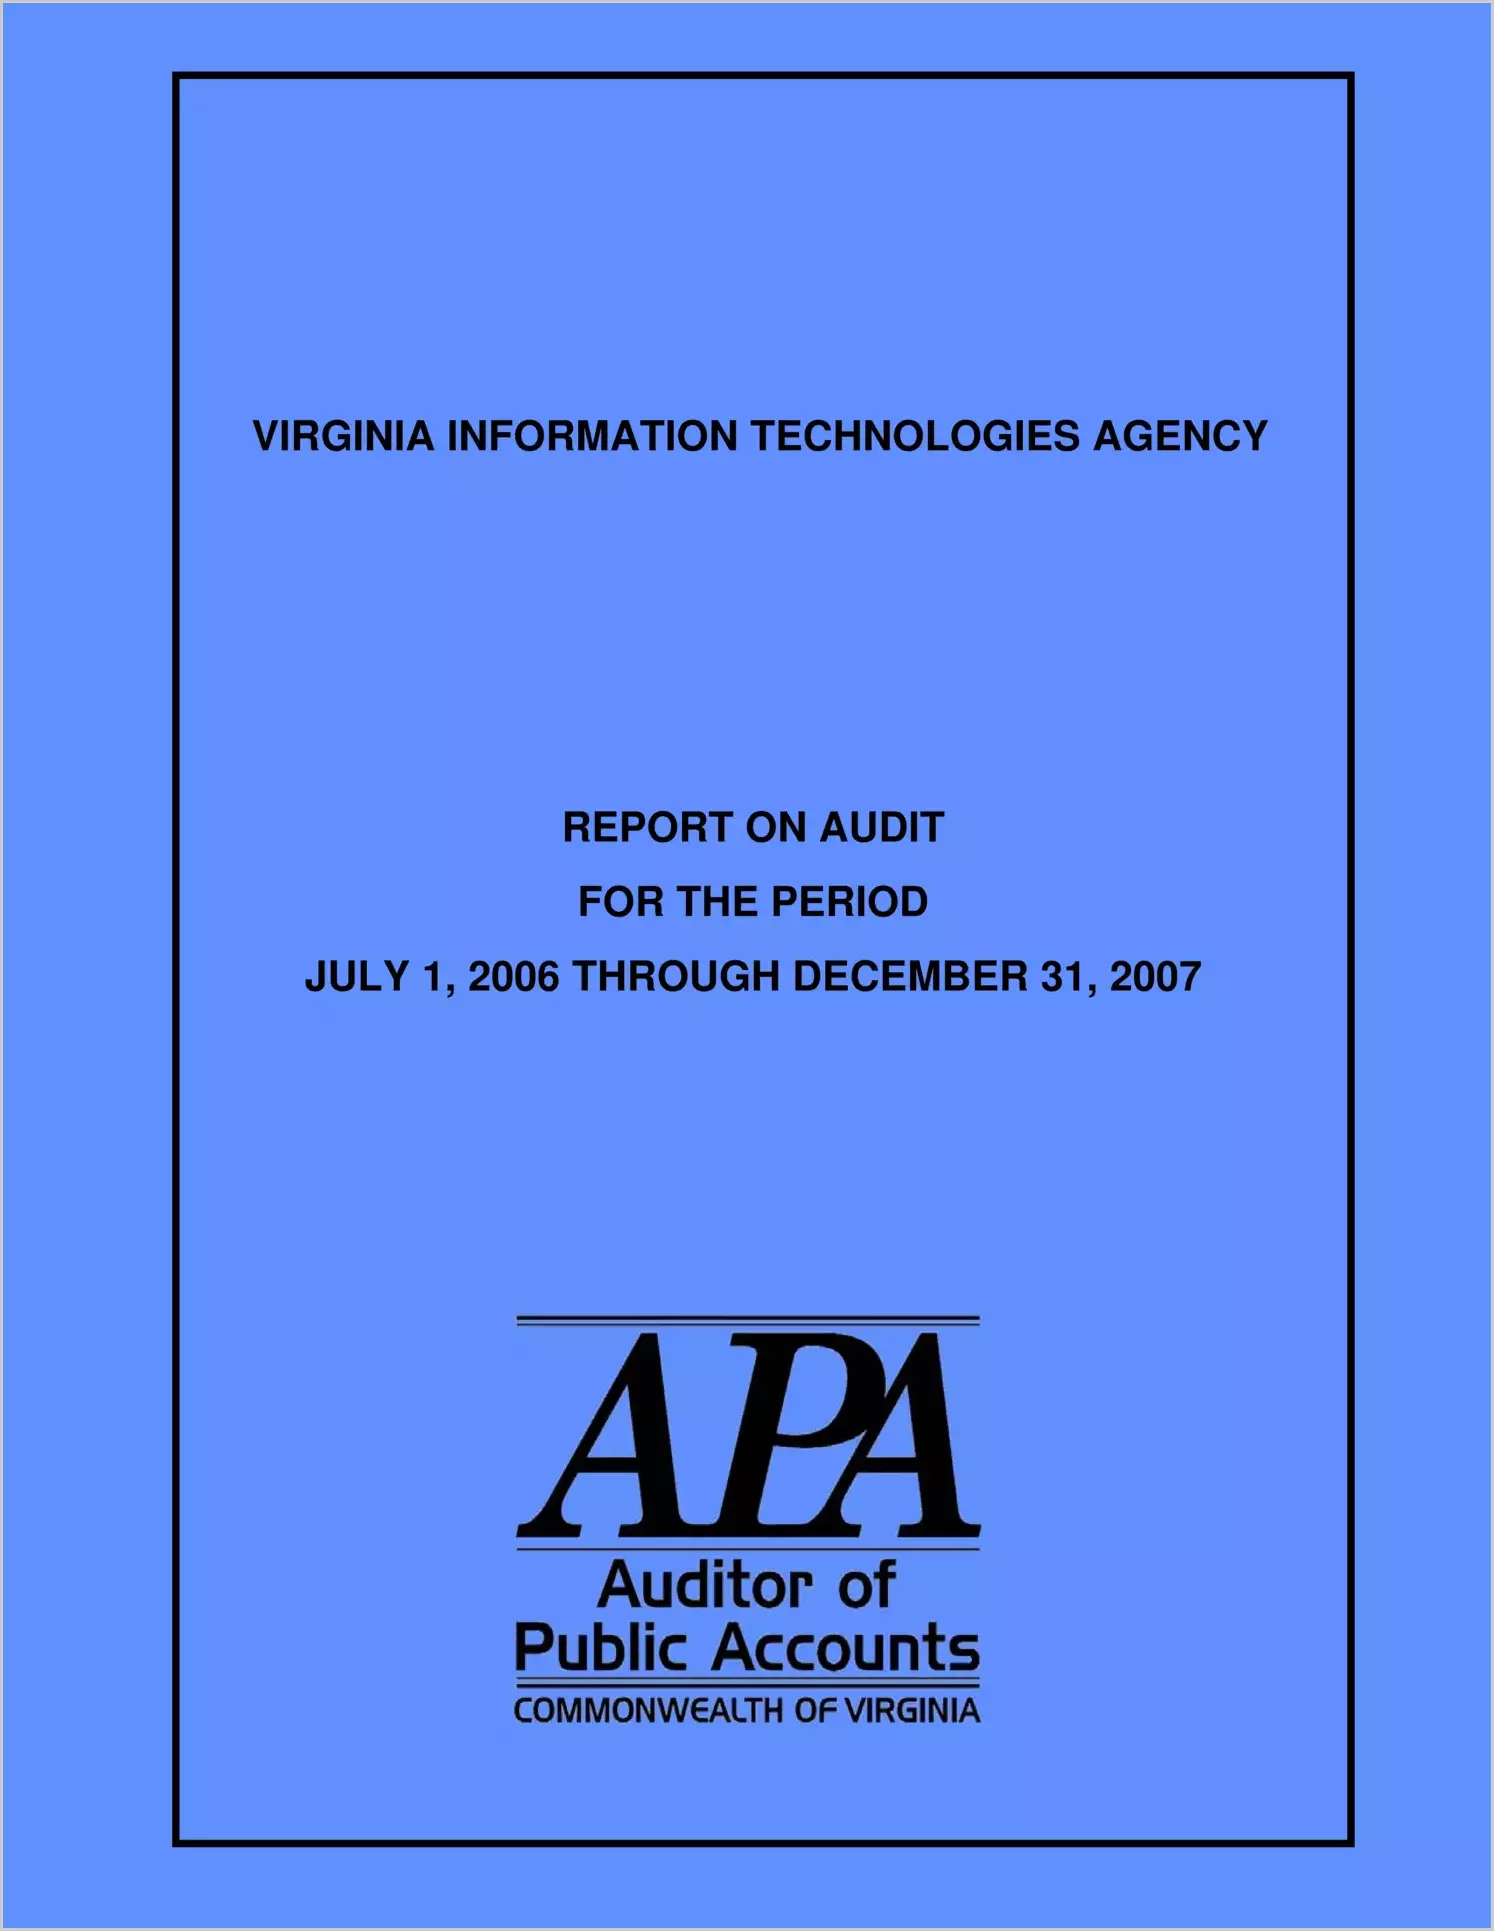 Virginia Information Technologies Agency for the period July 1, 2006 through December 31, 2007